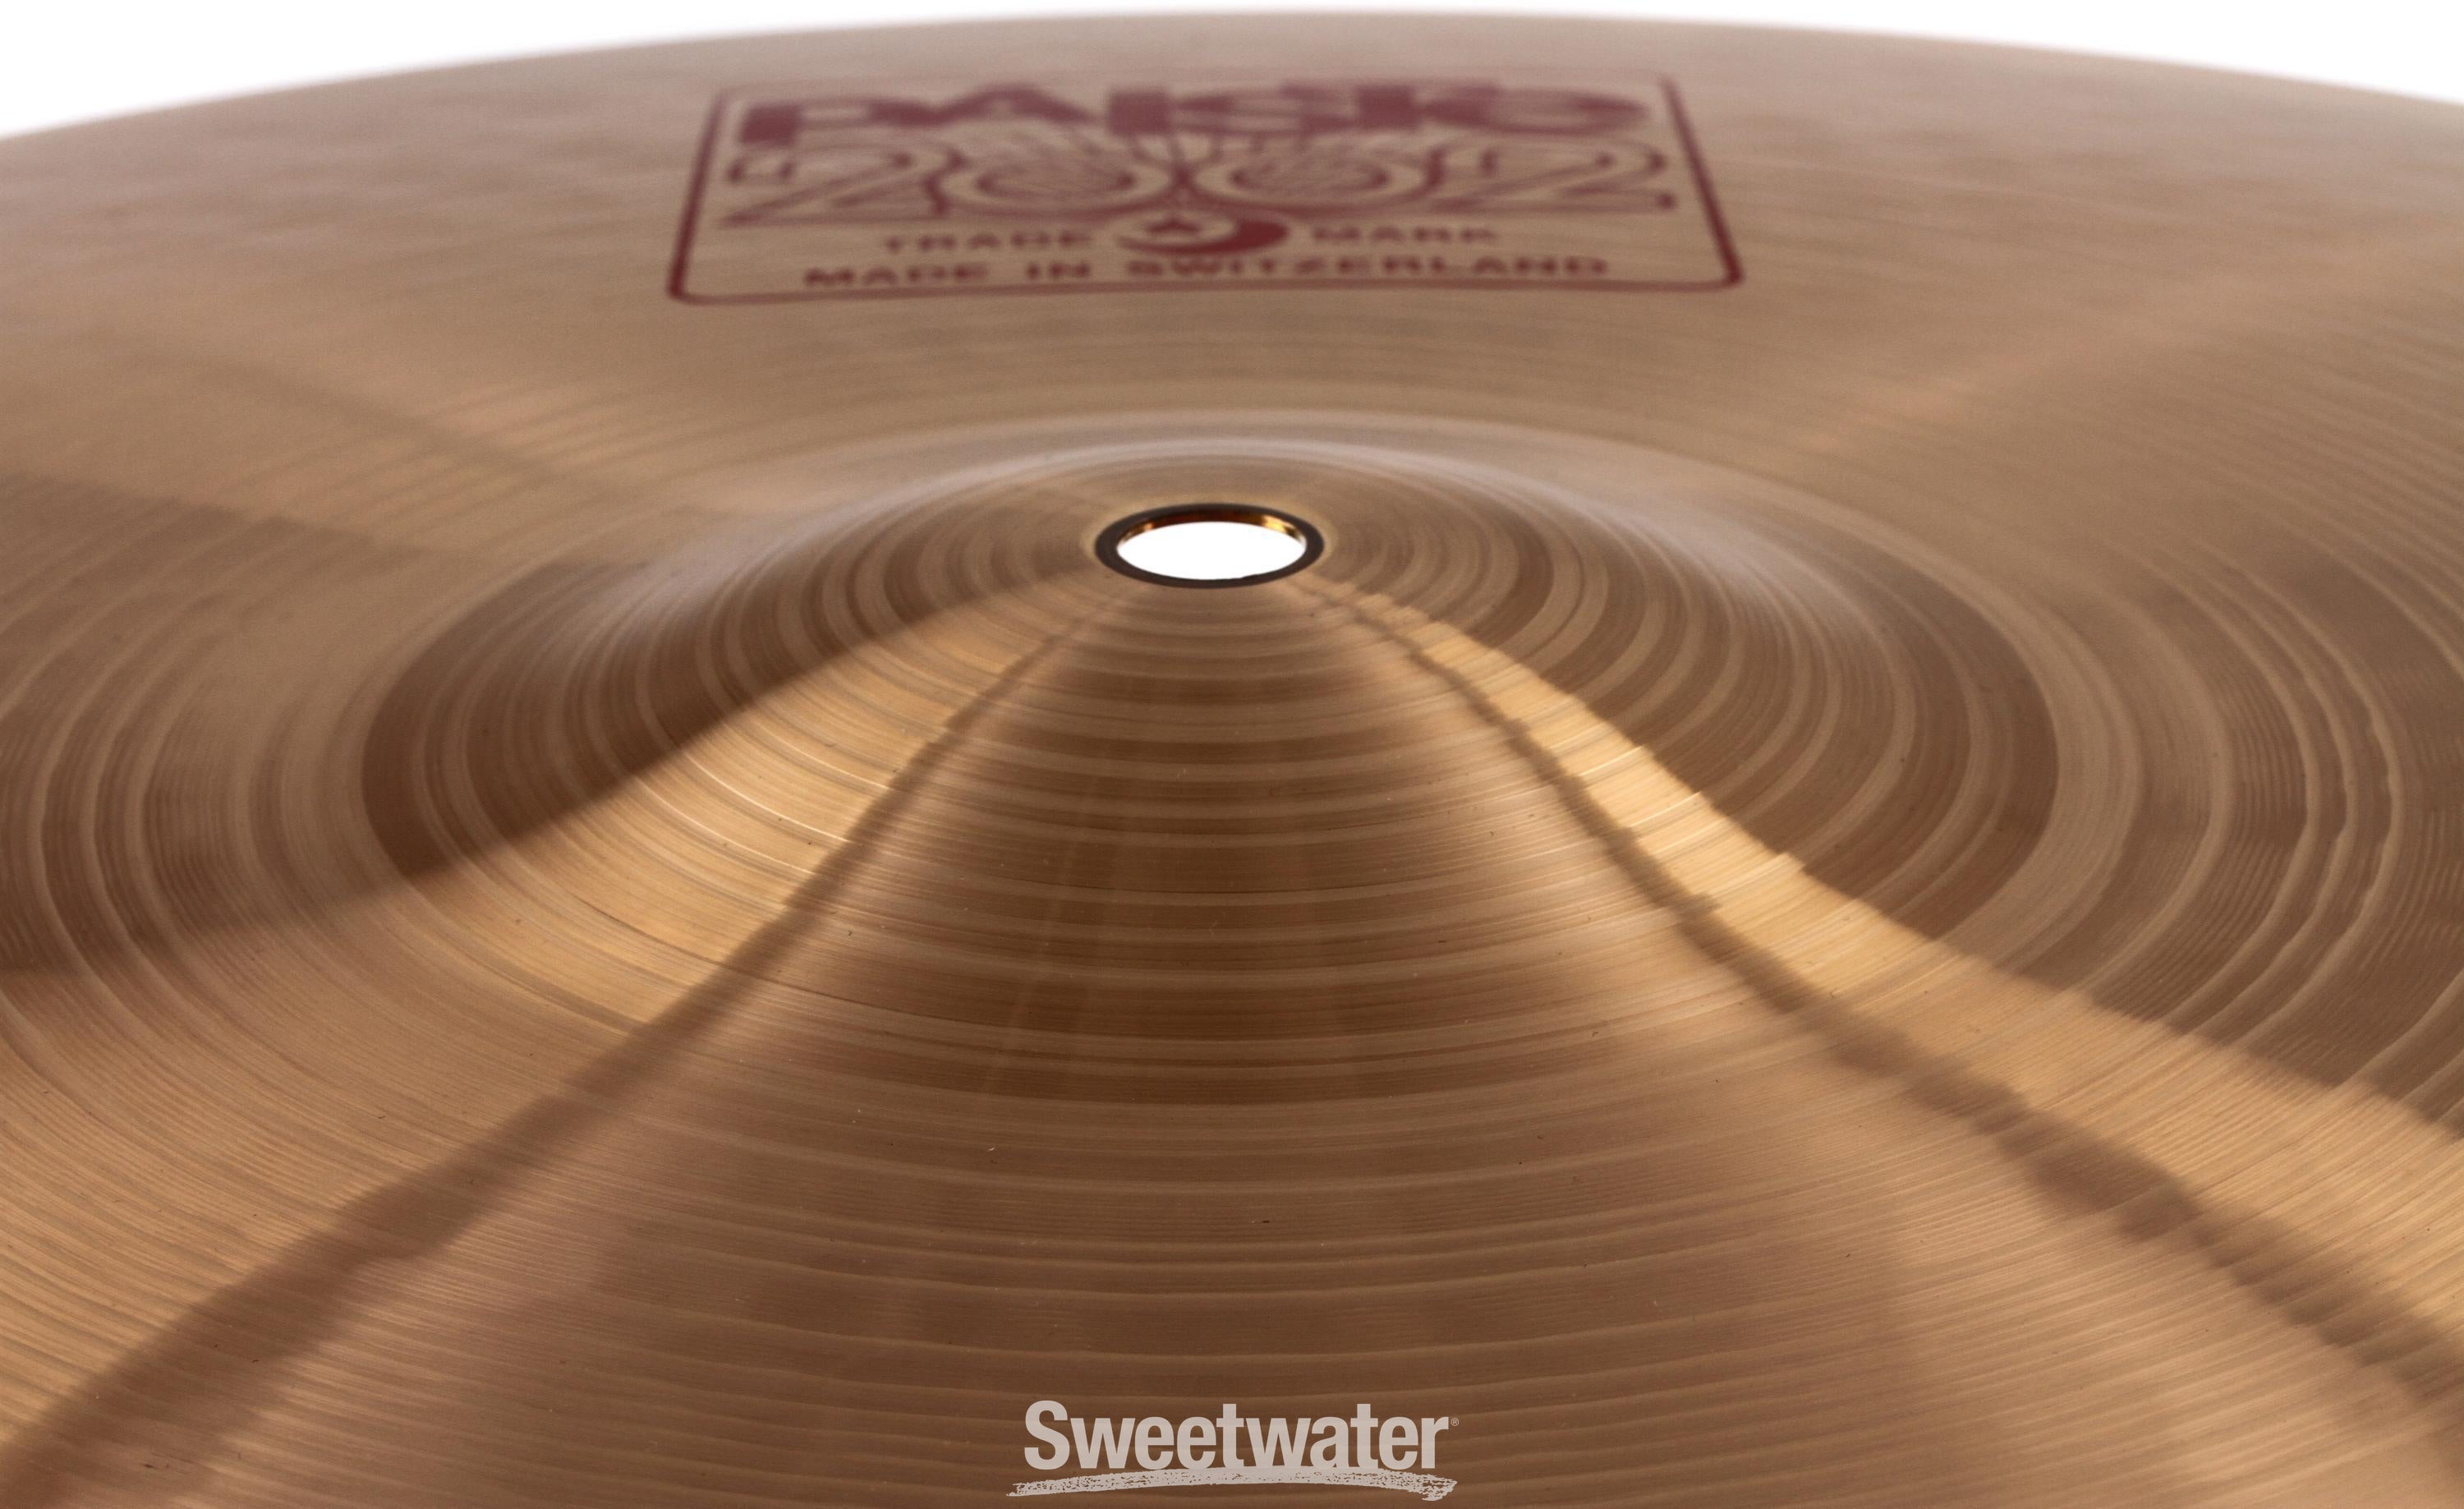 Paiste 17 inch 2002 Crash Cymbal | Sweetwater